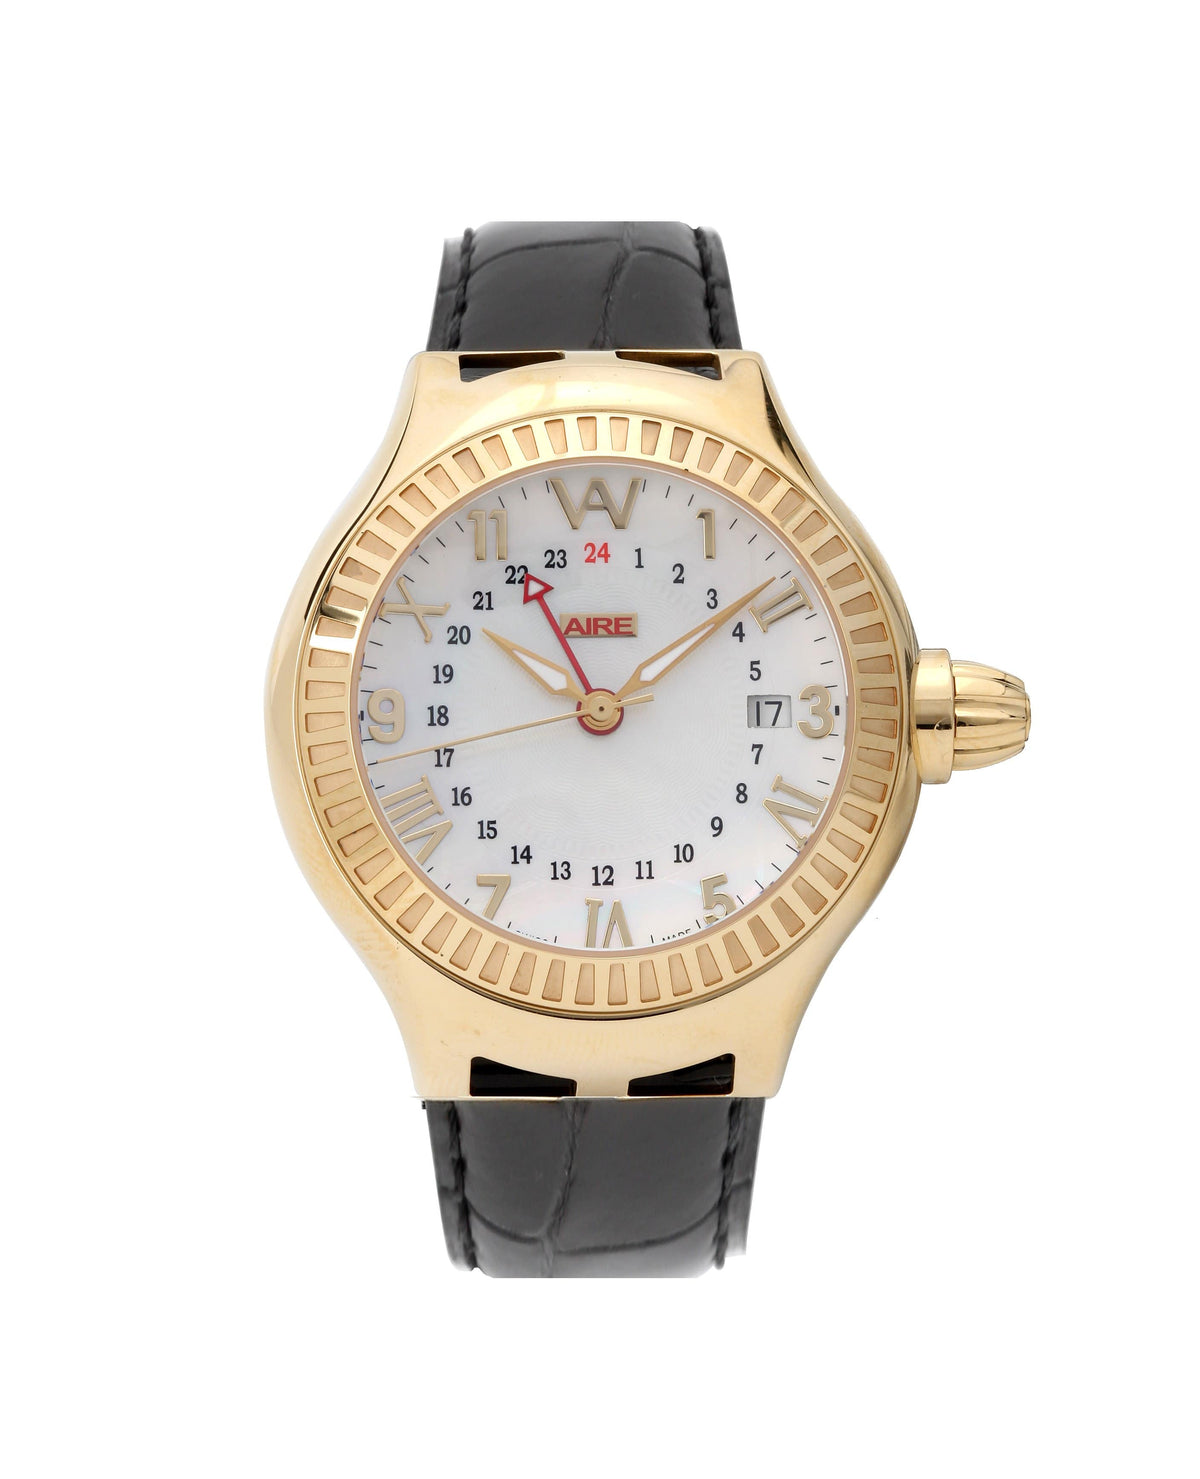 CHRIS AIRE WATCH - PARLAY GMT - Chris Aire Fine Jewelry & Timepieces